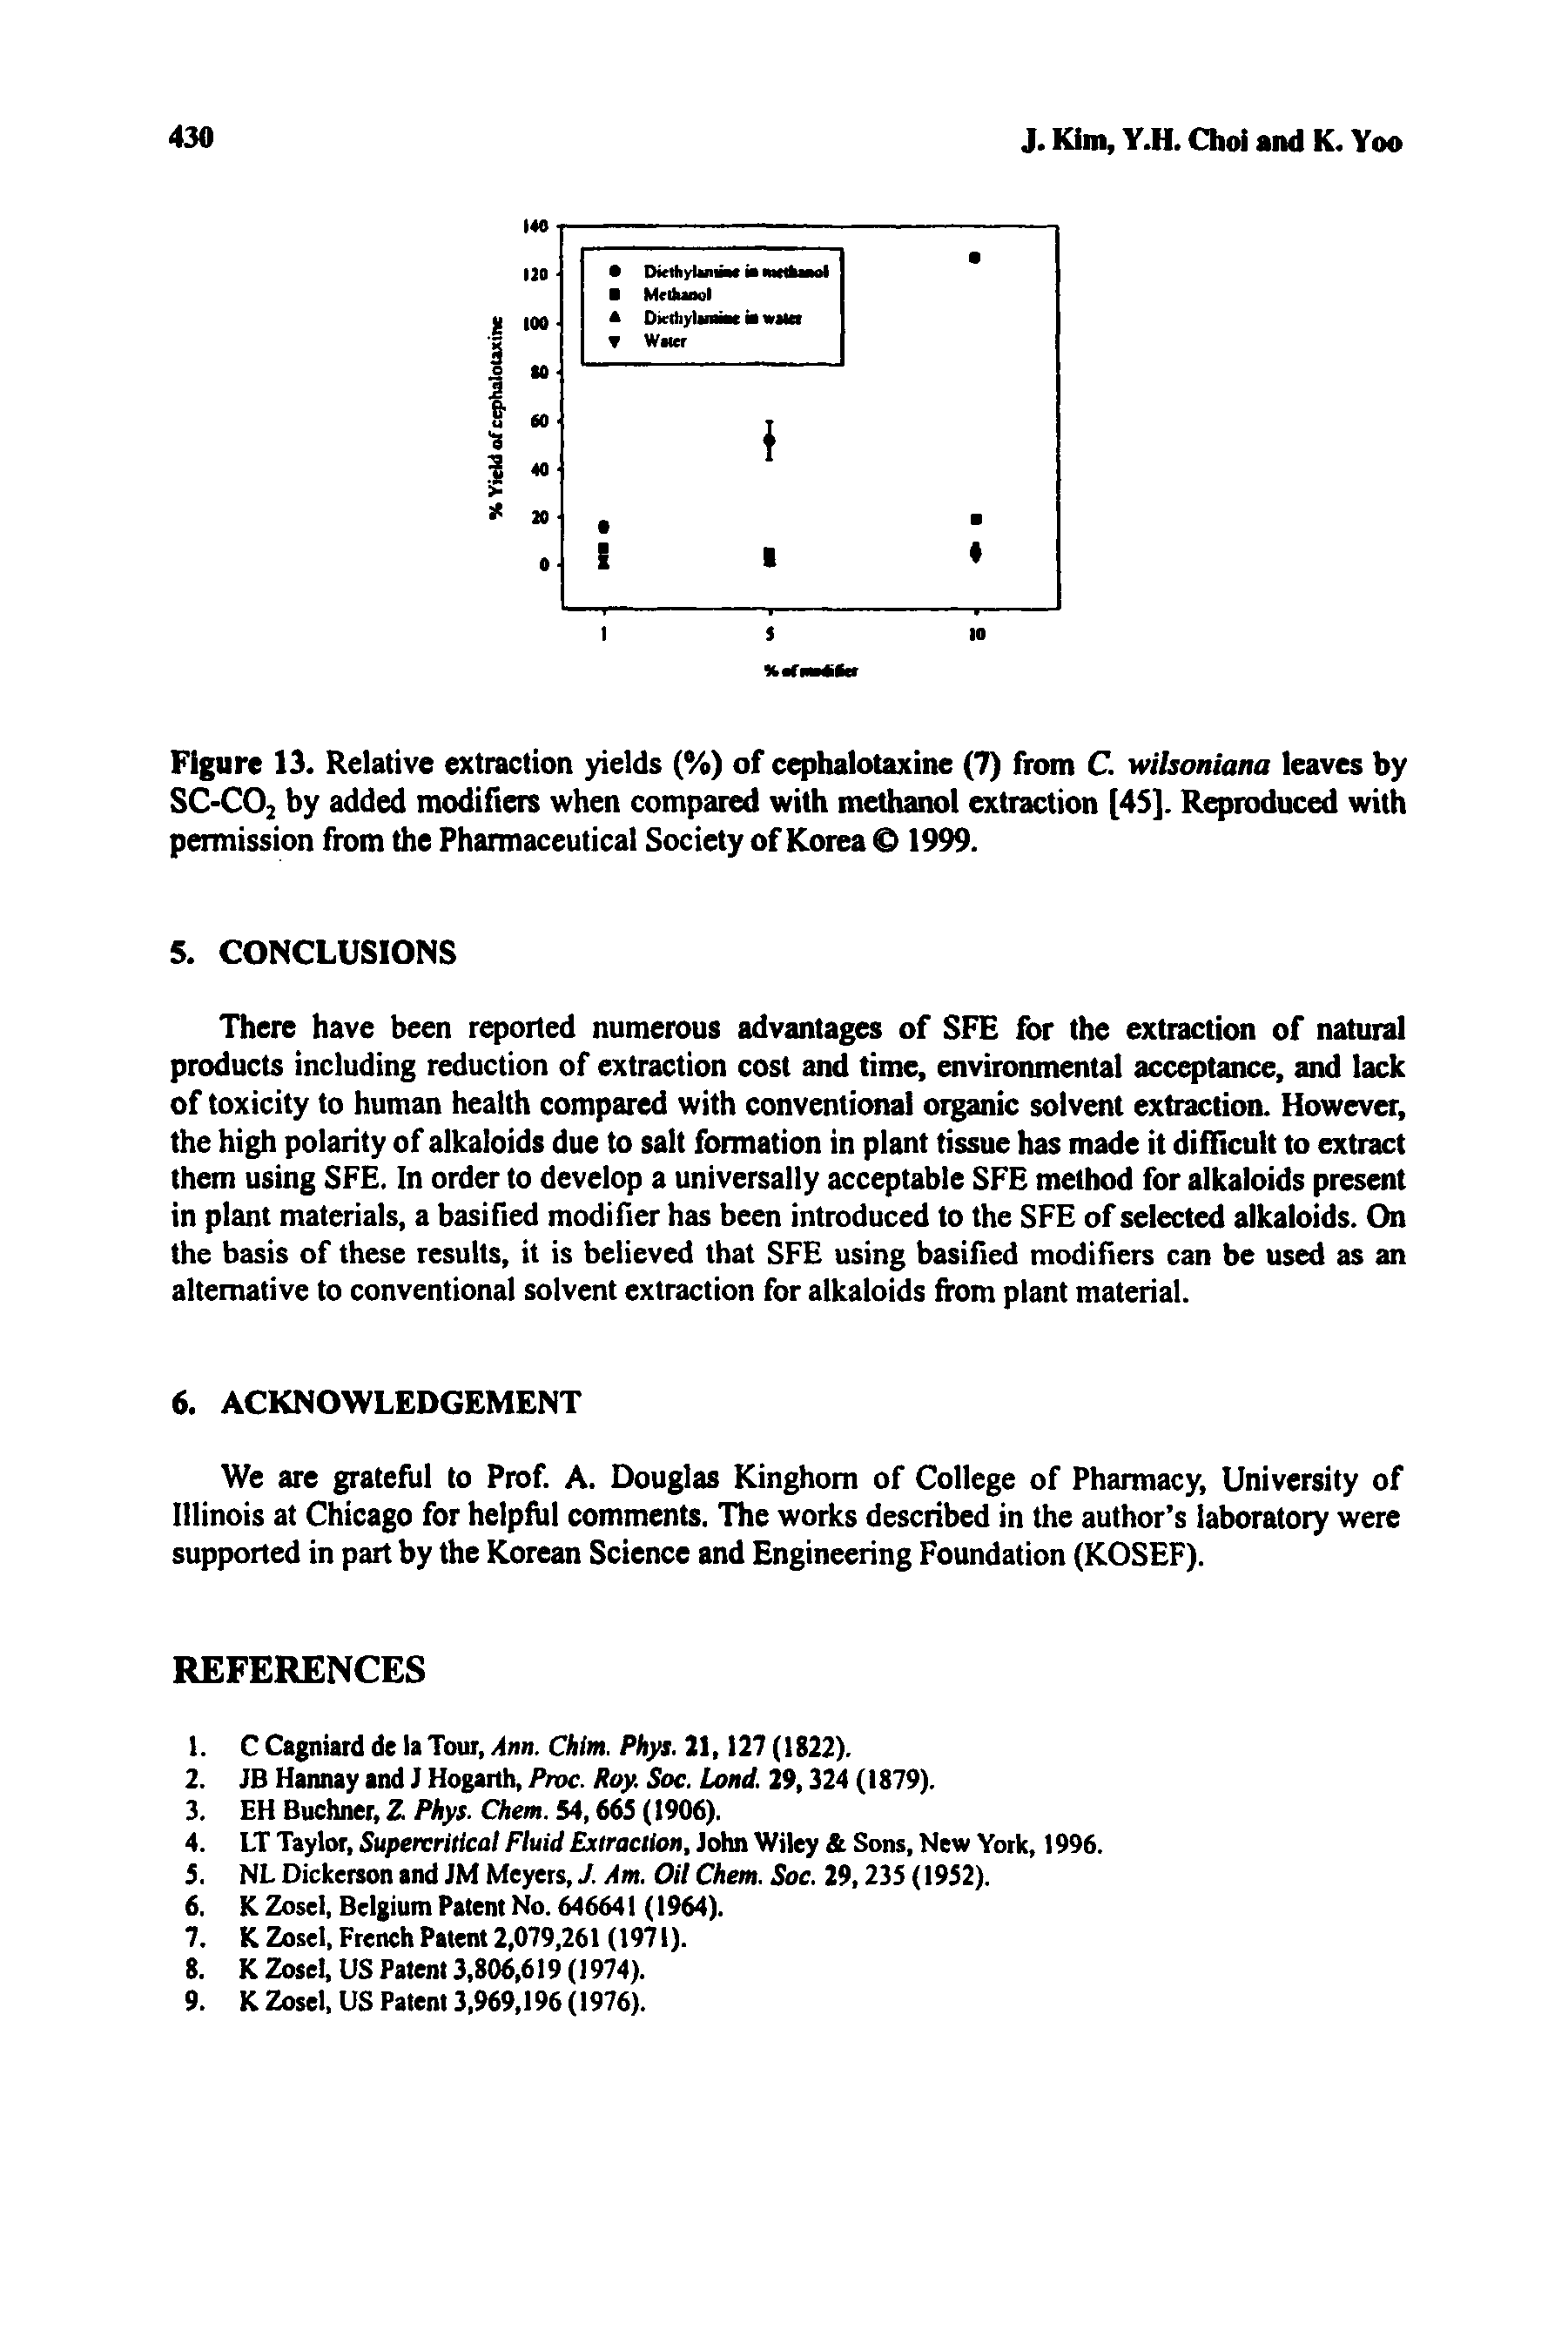 Figure 13. Relative extraction yields (%) of cephalotaxine (7) from C. wilsoniana leaves by SC-C02 by added modifiers when compared with methanol extraction [45], Reproduced with permission from the Pharmaceutical Society of Korea 1999.